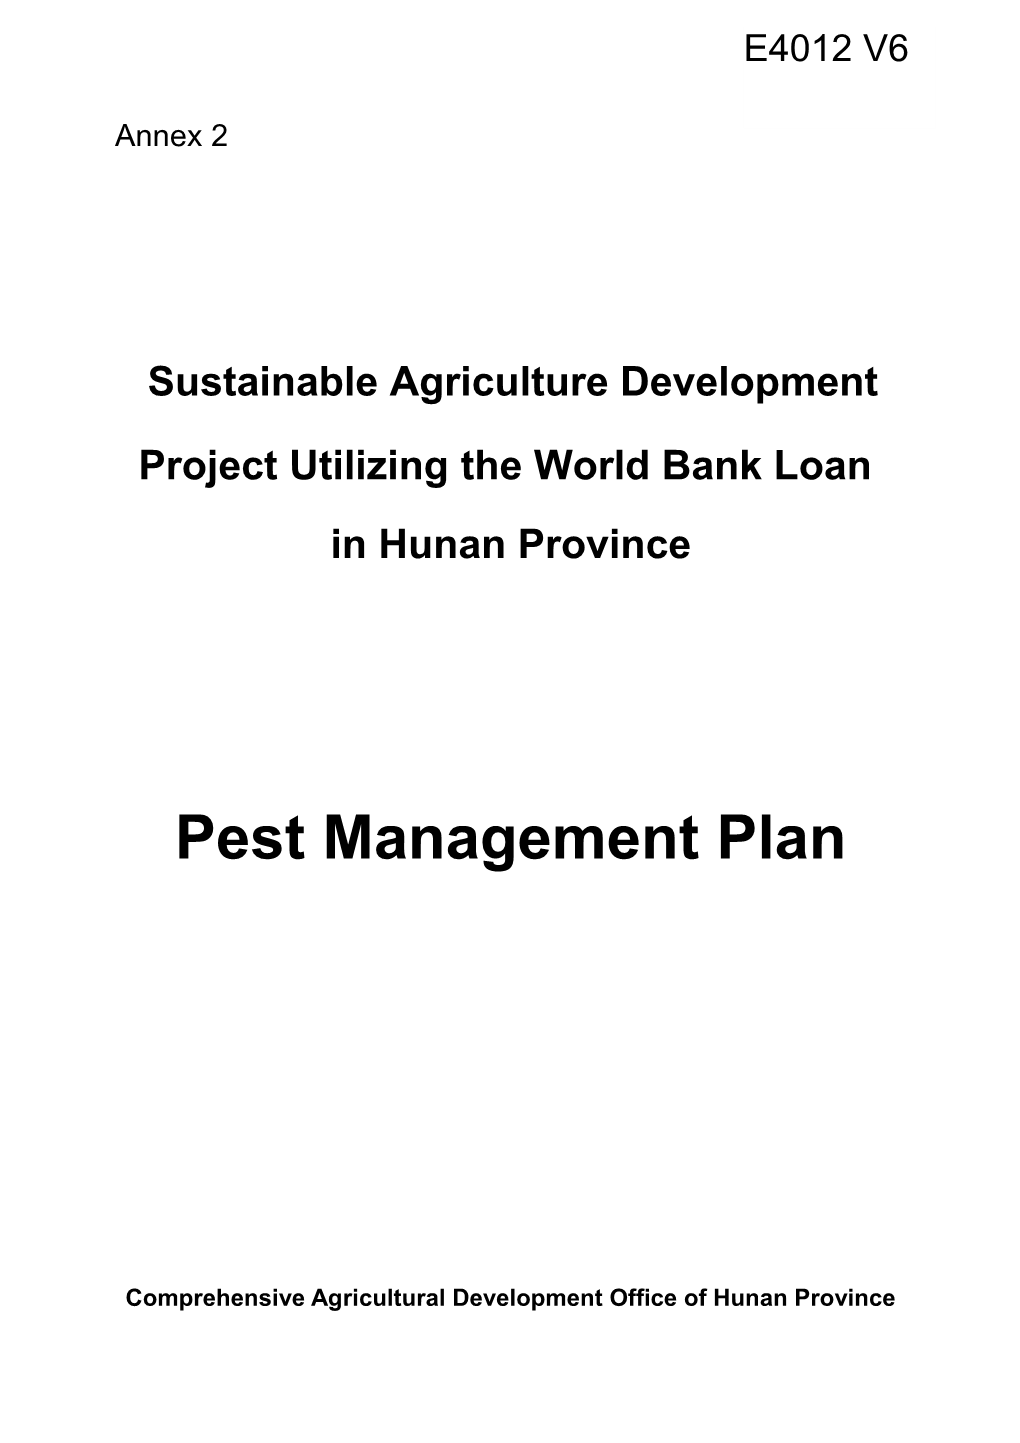 Sustainable Agriculture Development Project Utilizing the World Bank Loan